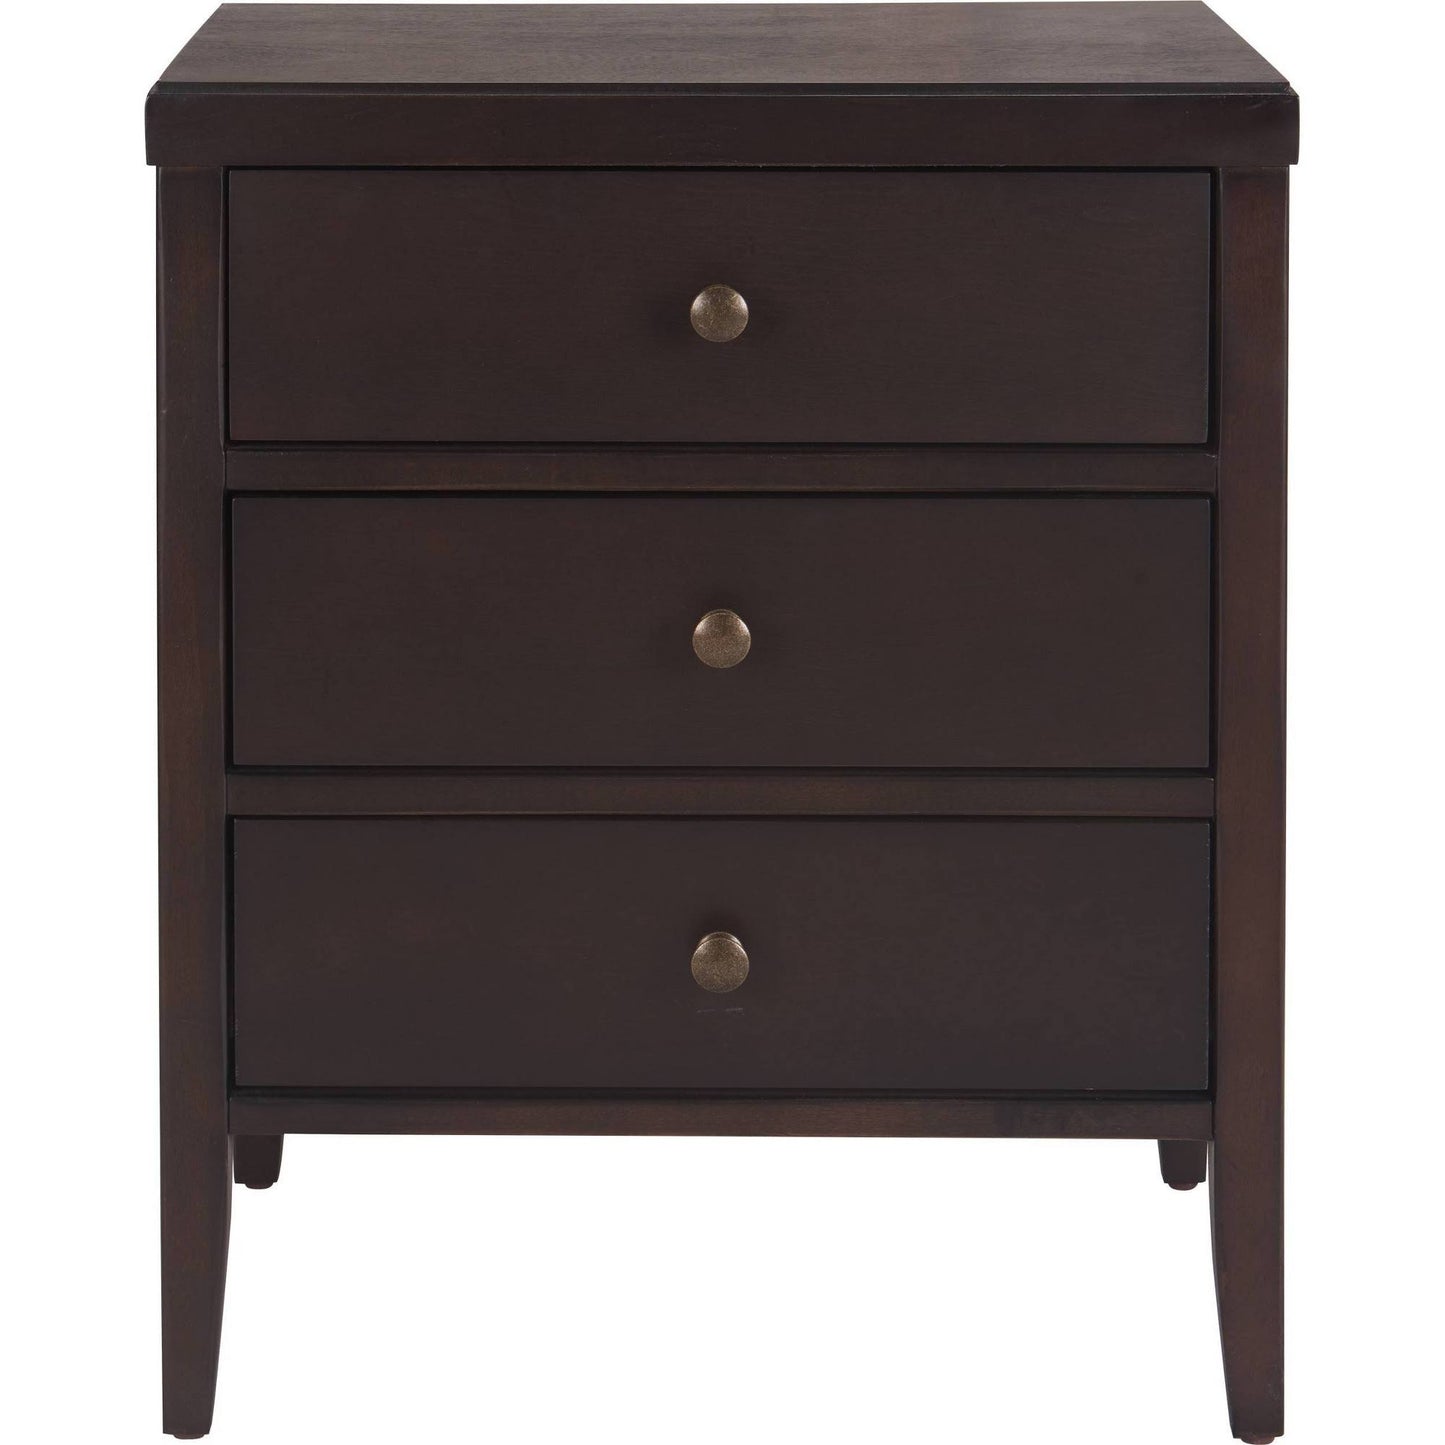 Finley Solid Wood 3 Drawer Nightstand Gray